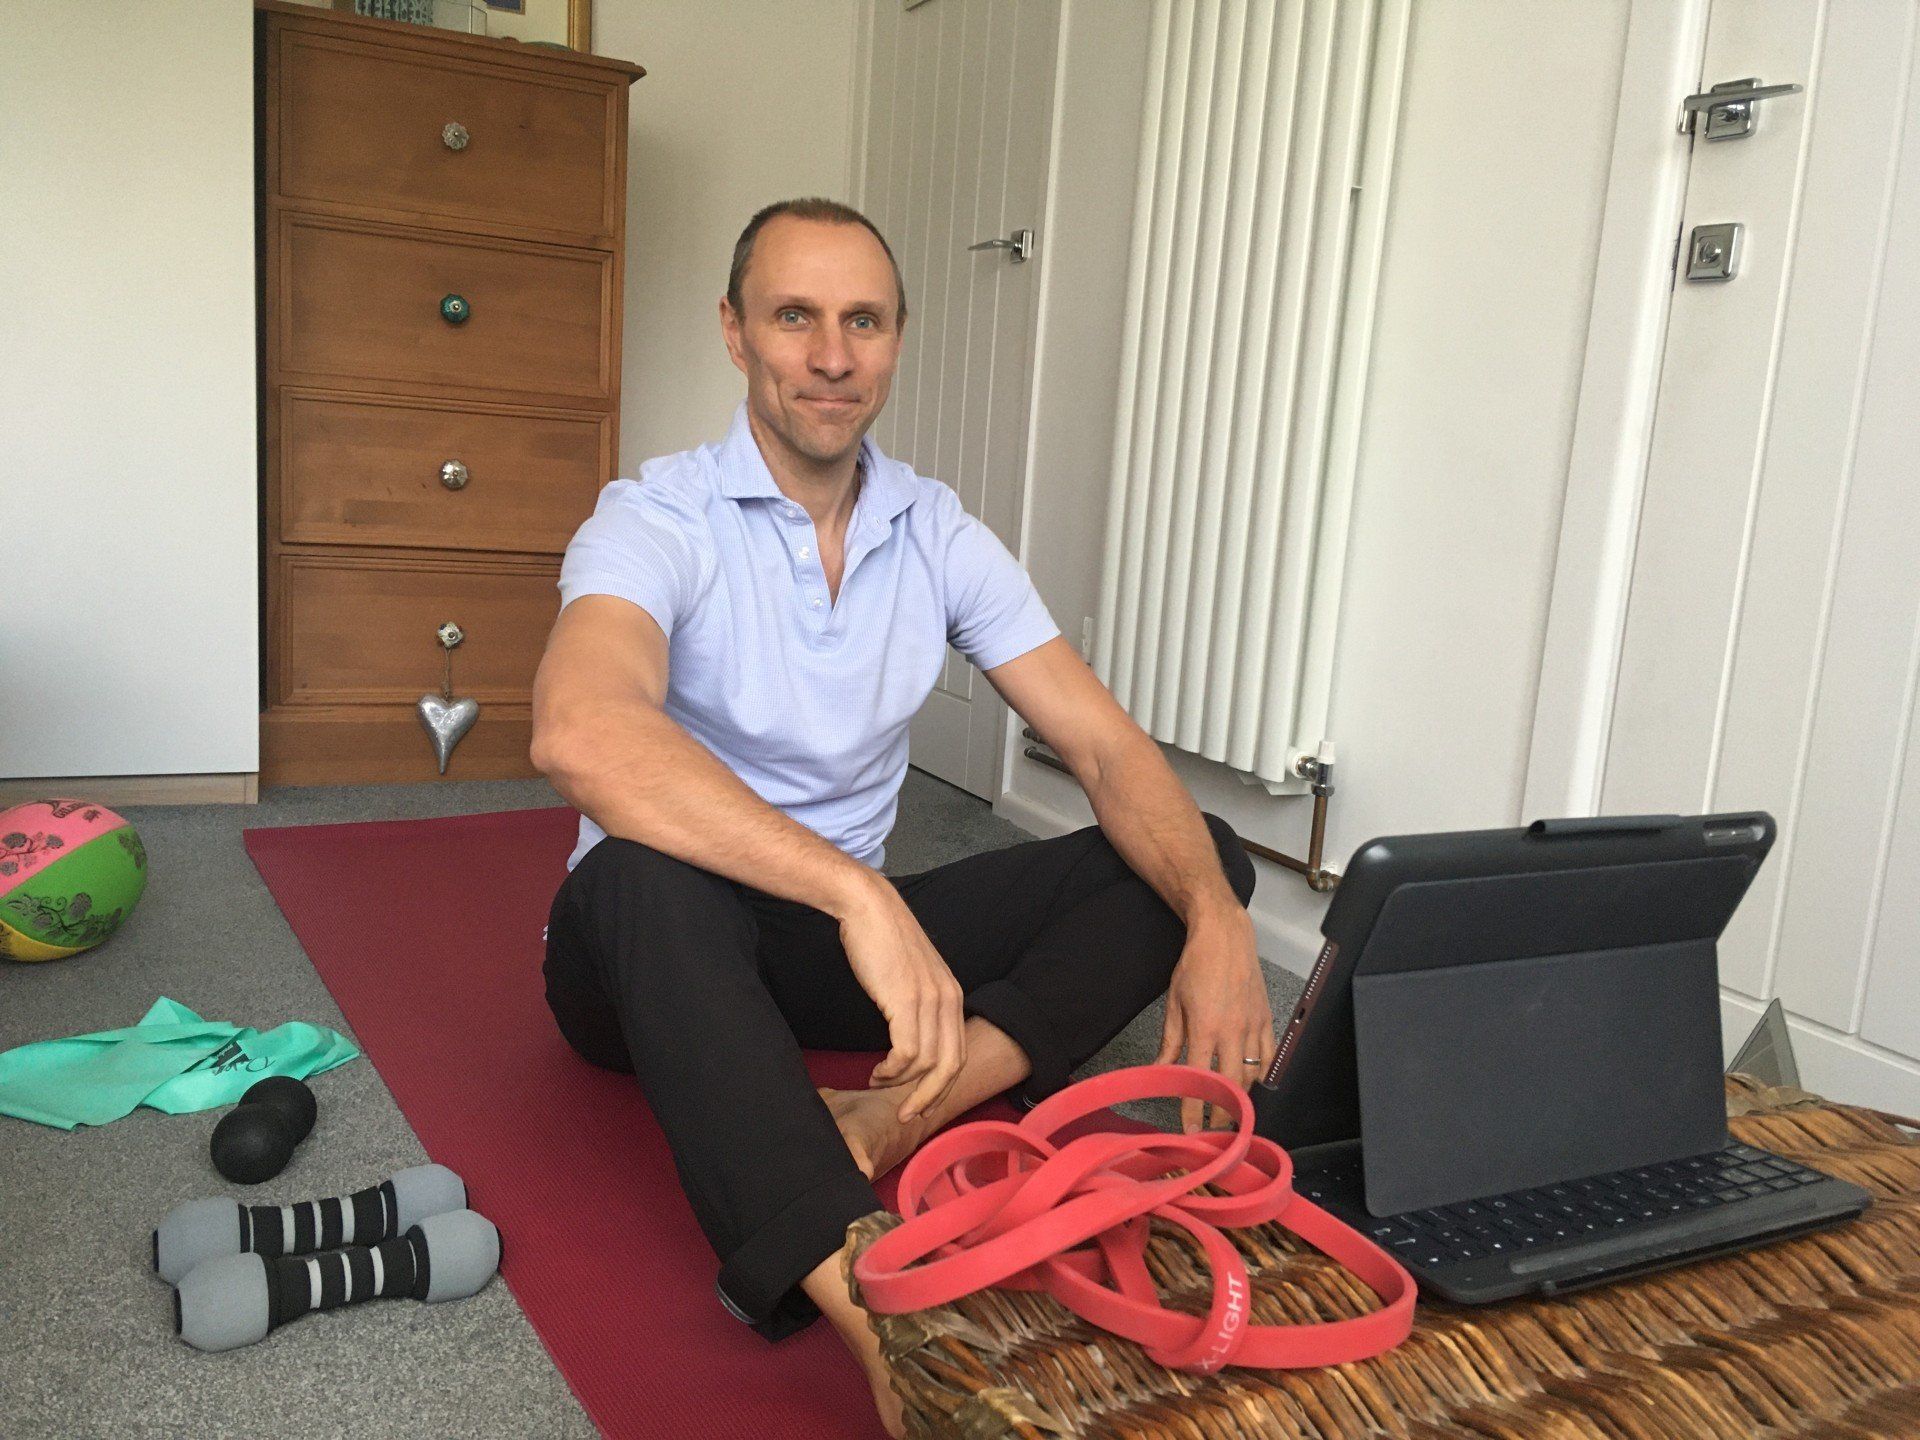 John Moore offering video physiotherapy appointments throughout coronavirus lockdown